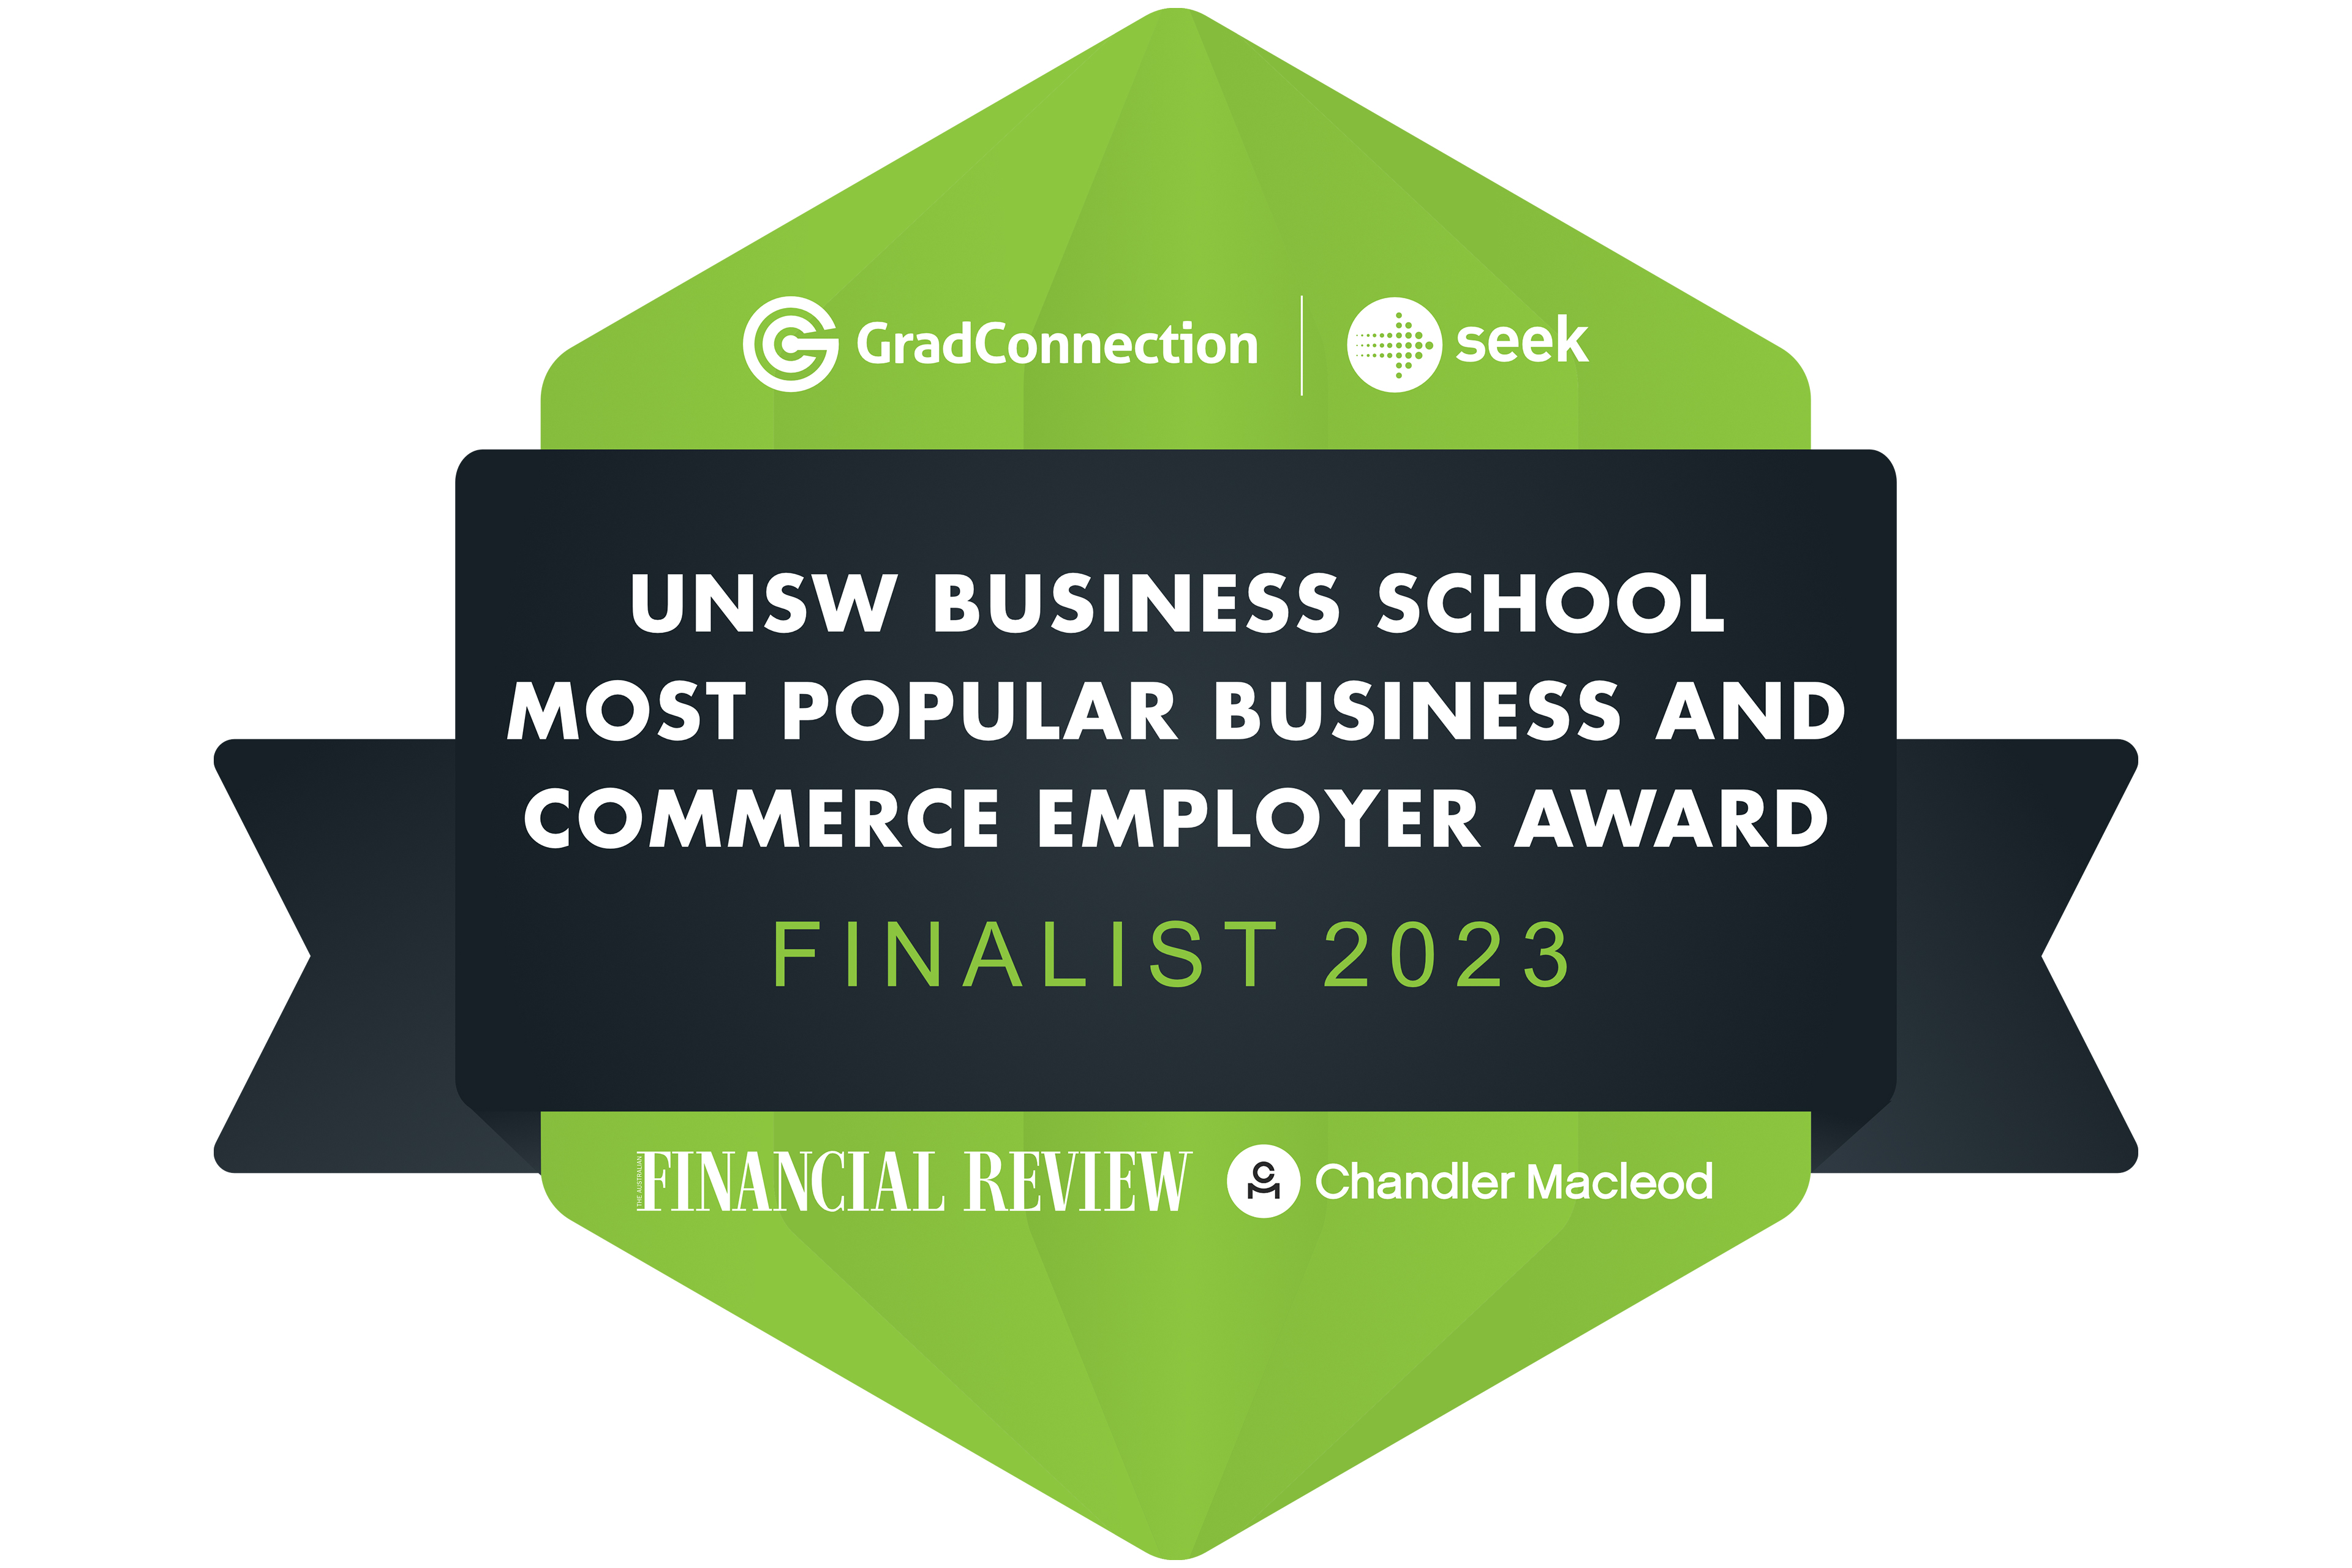 UNSW Business school most popular business and commerce employer award